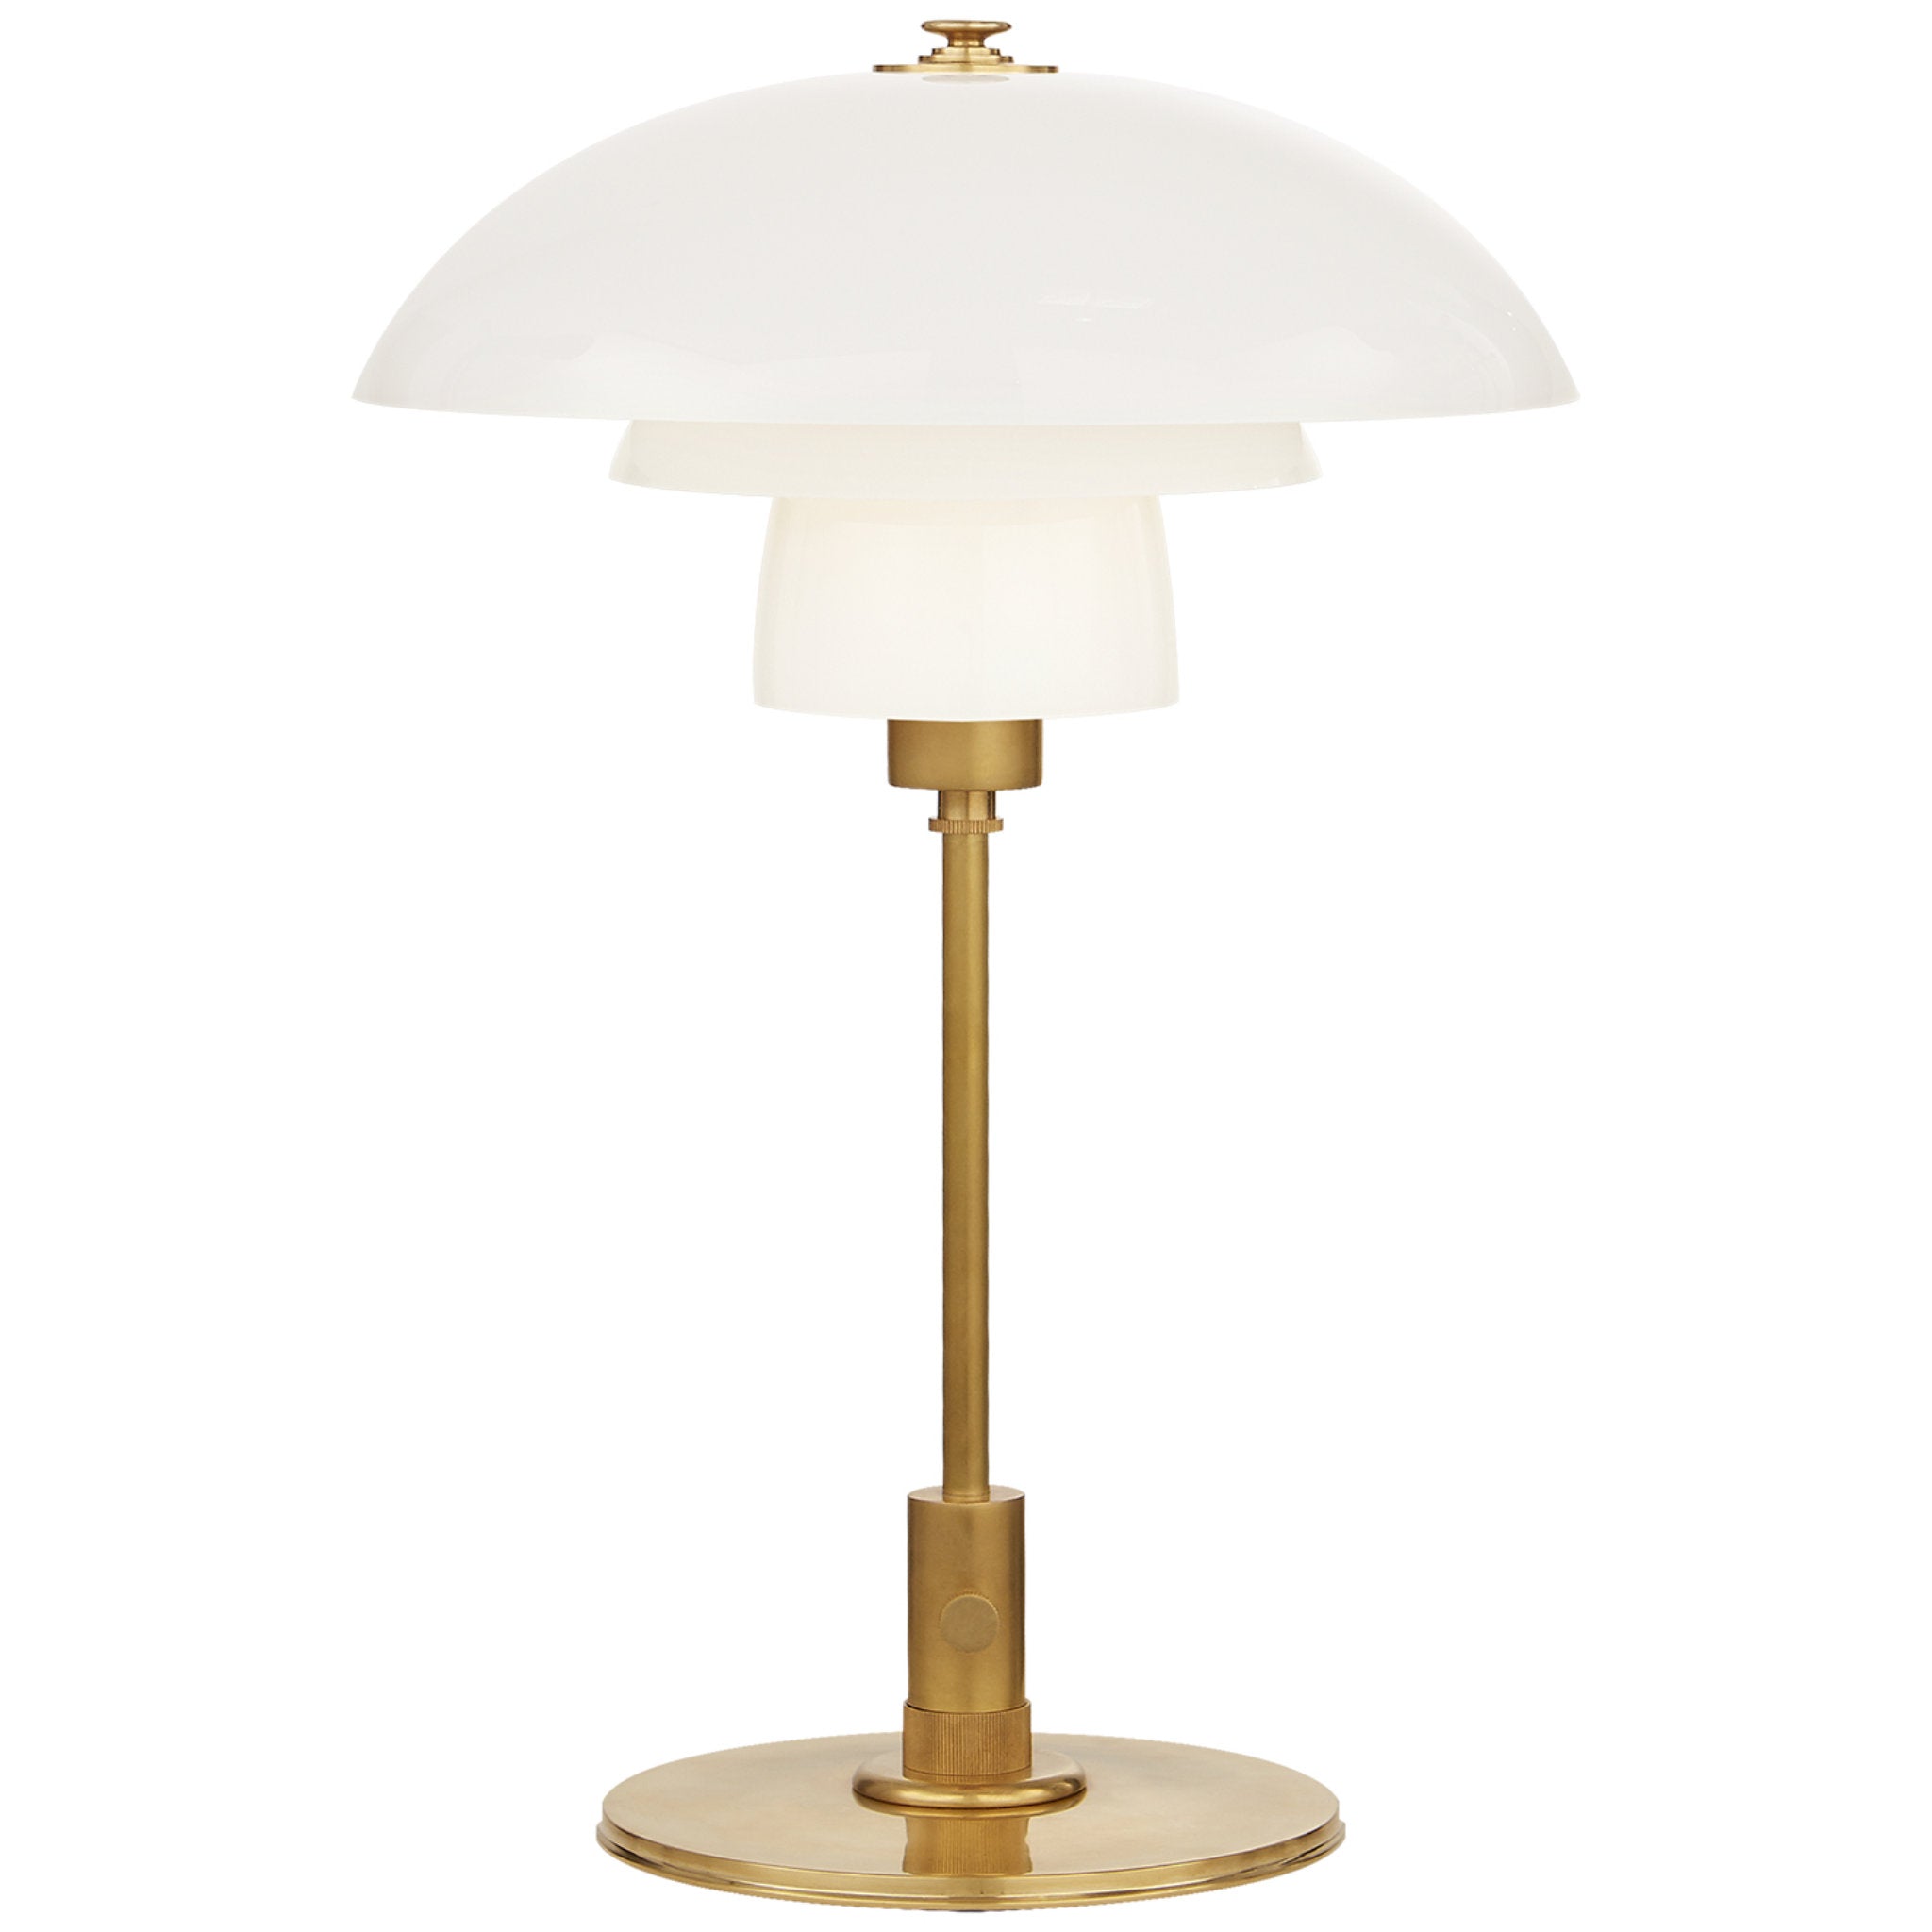 Thomas O'Brien Whitman Desk Lamp in Hand-Rubbed Antique Brass with White Glass Shade